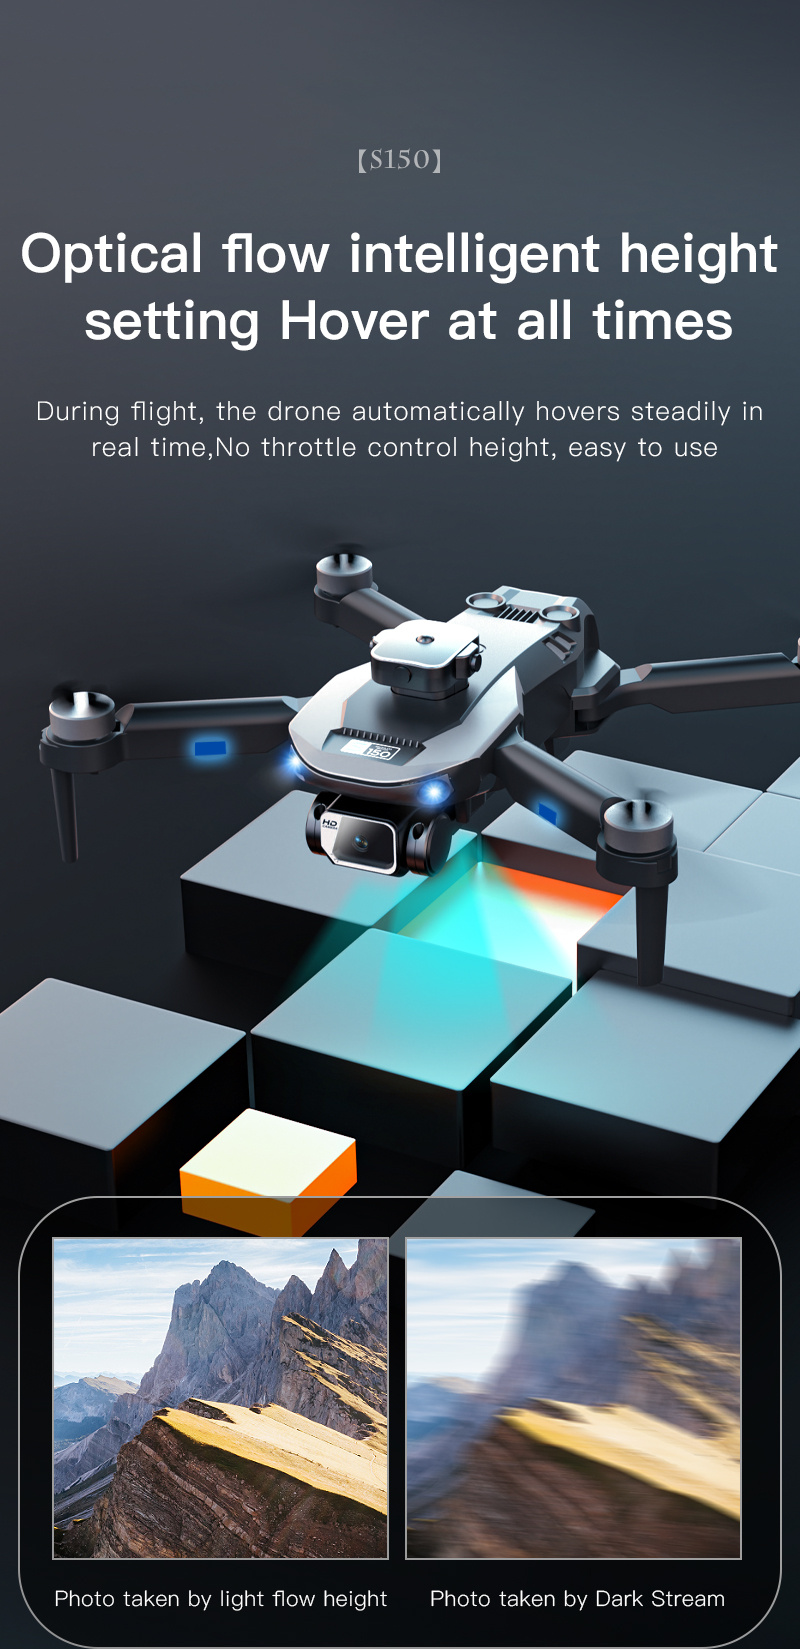 drone s150 hd esc dual camera drone hd optical flow positioning dron brushless motor four sided obstacle avoidance quadcopter toy uav details 5